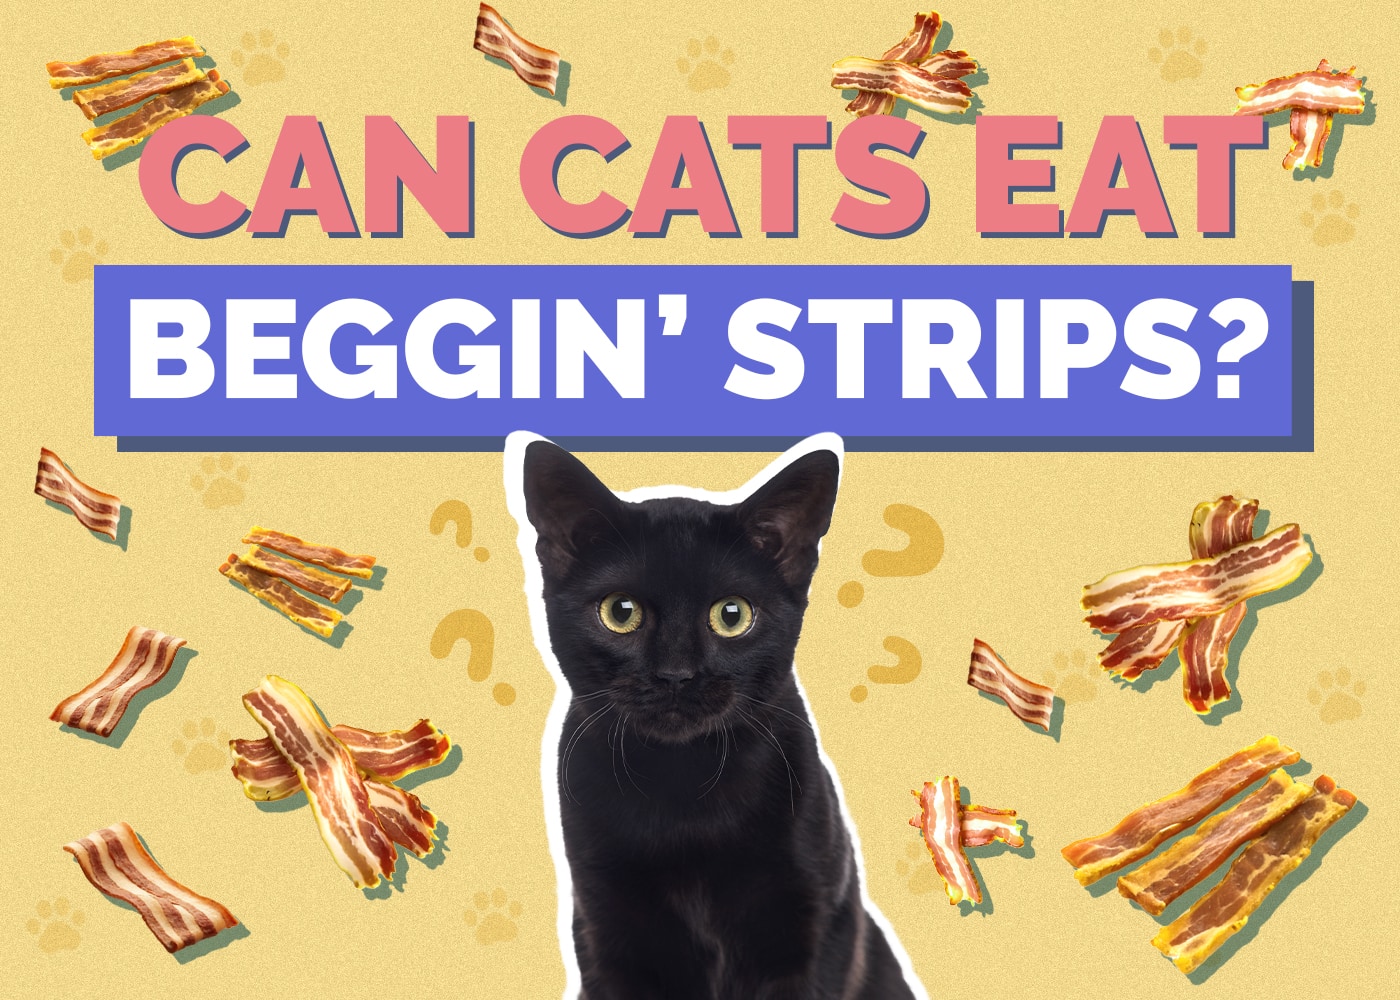 Can Cats Eat beggin-strips